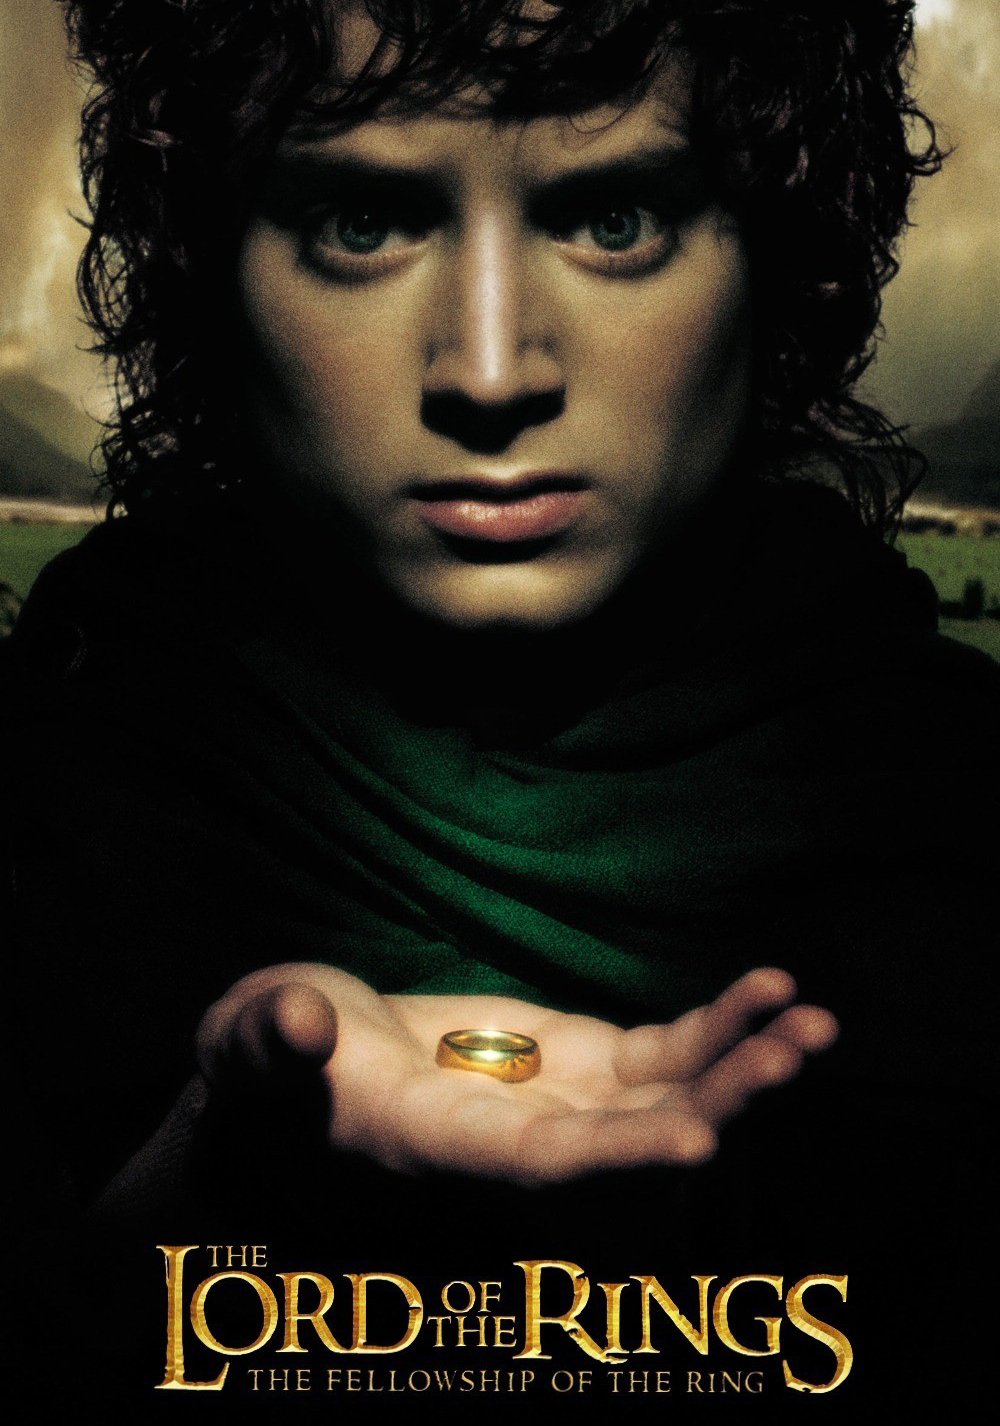 The Lord of the Rings: The Fellowship of the Ring Art